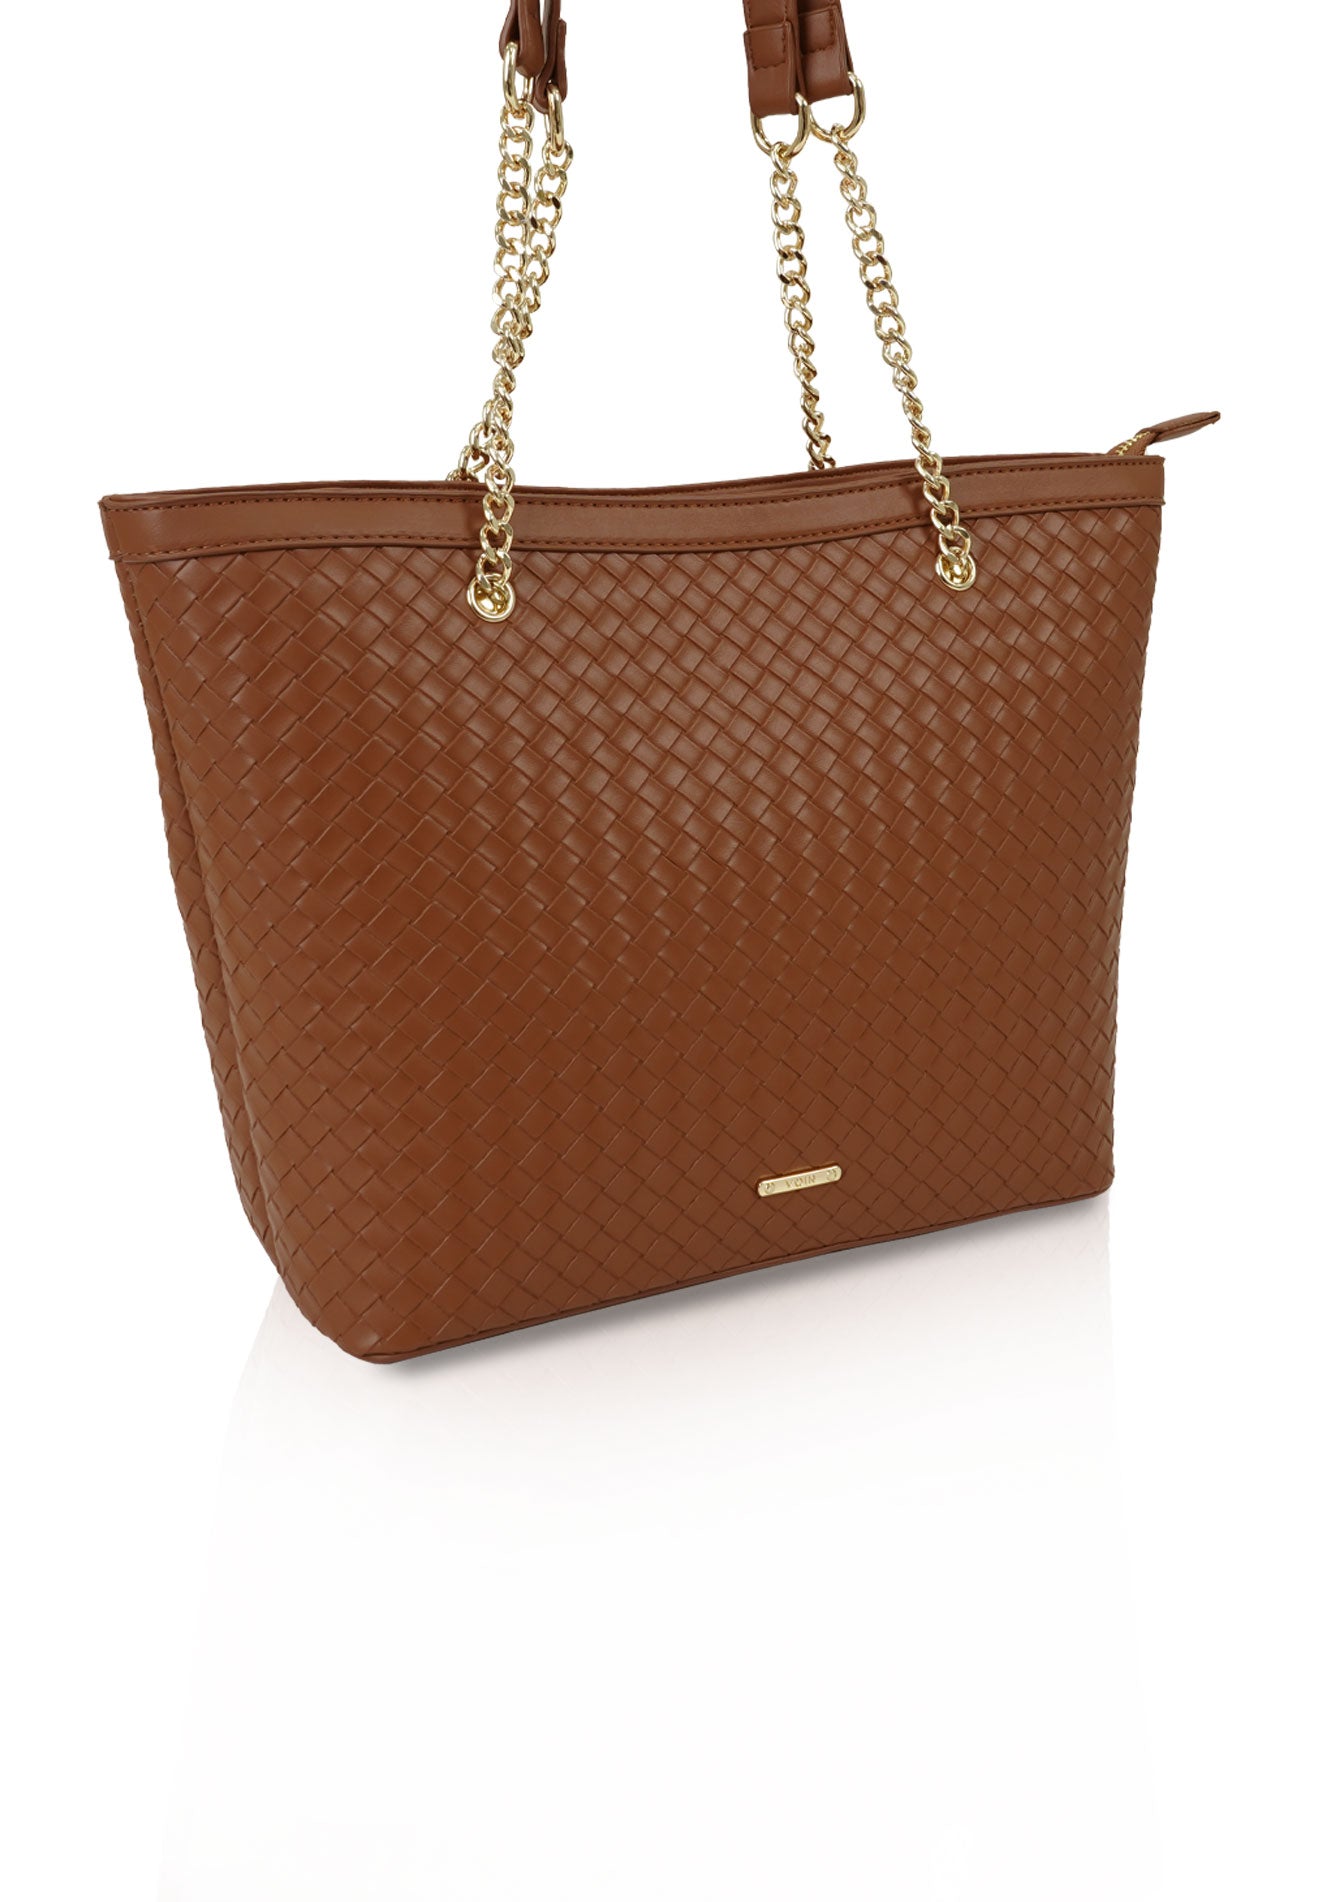 VOIR Mid-Sized Woven Tote Bag